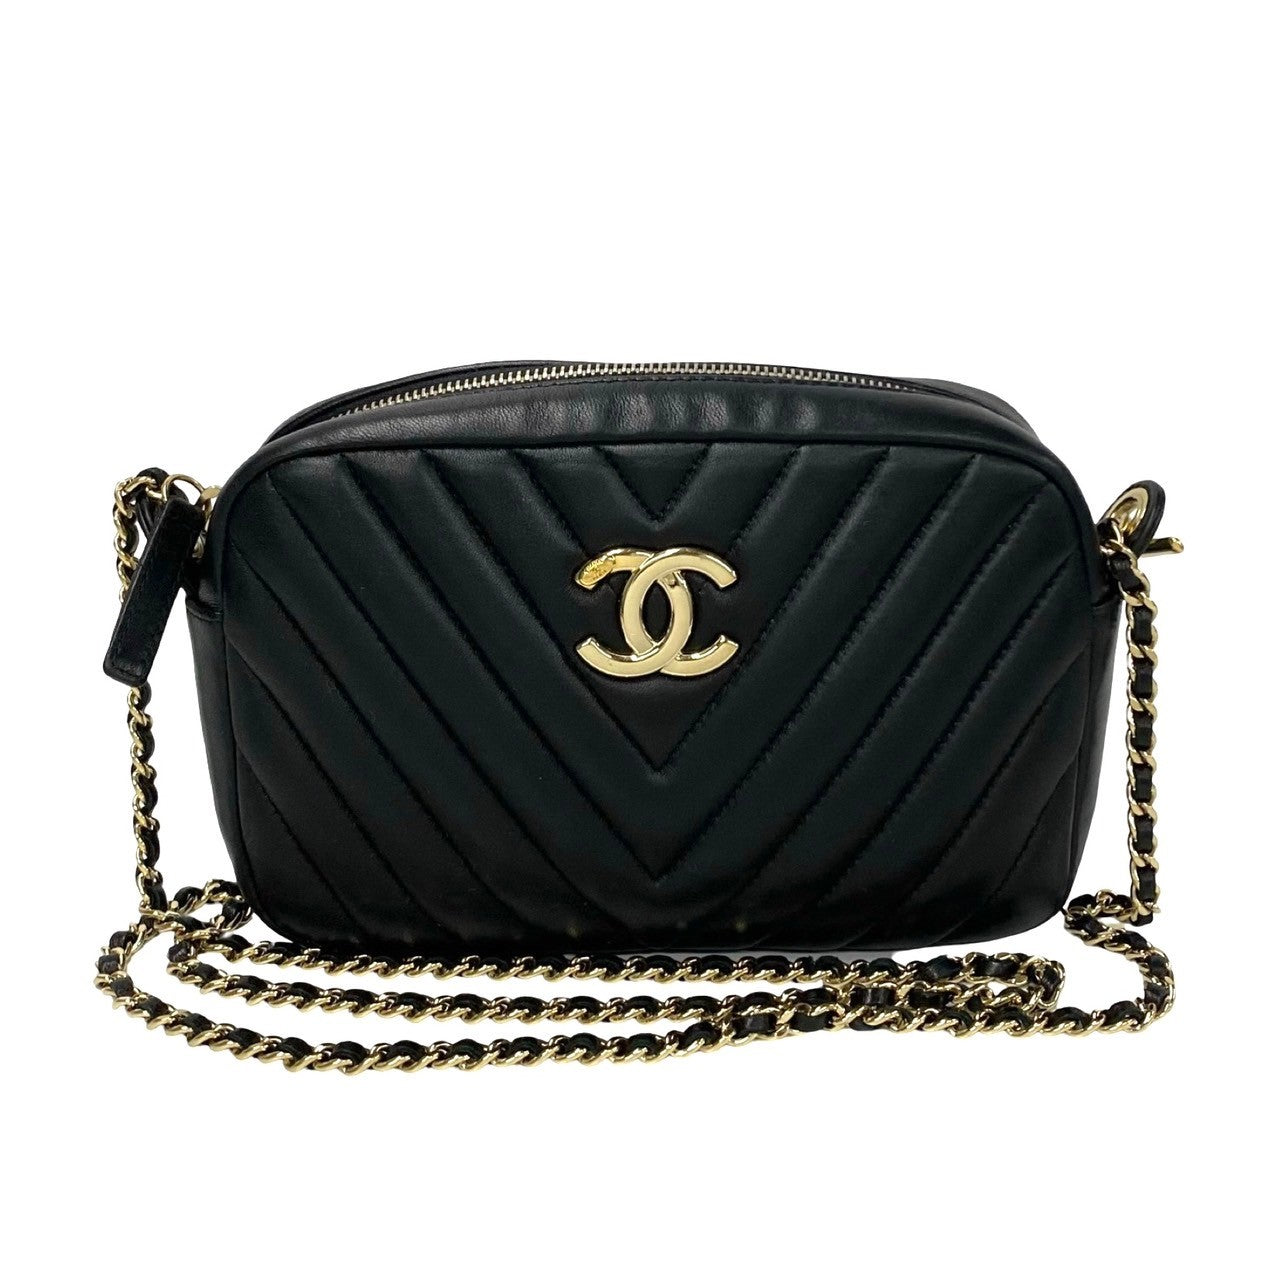 Chanel V Stitch Coco Lambskin Chain Shoulder Bag Leather Shoulder Bag 20S in Excellent condition